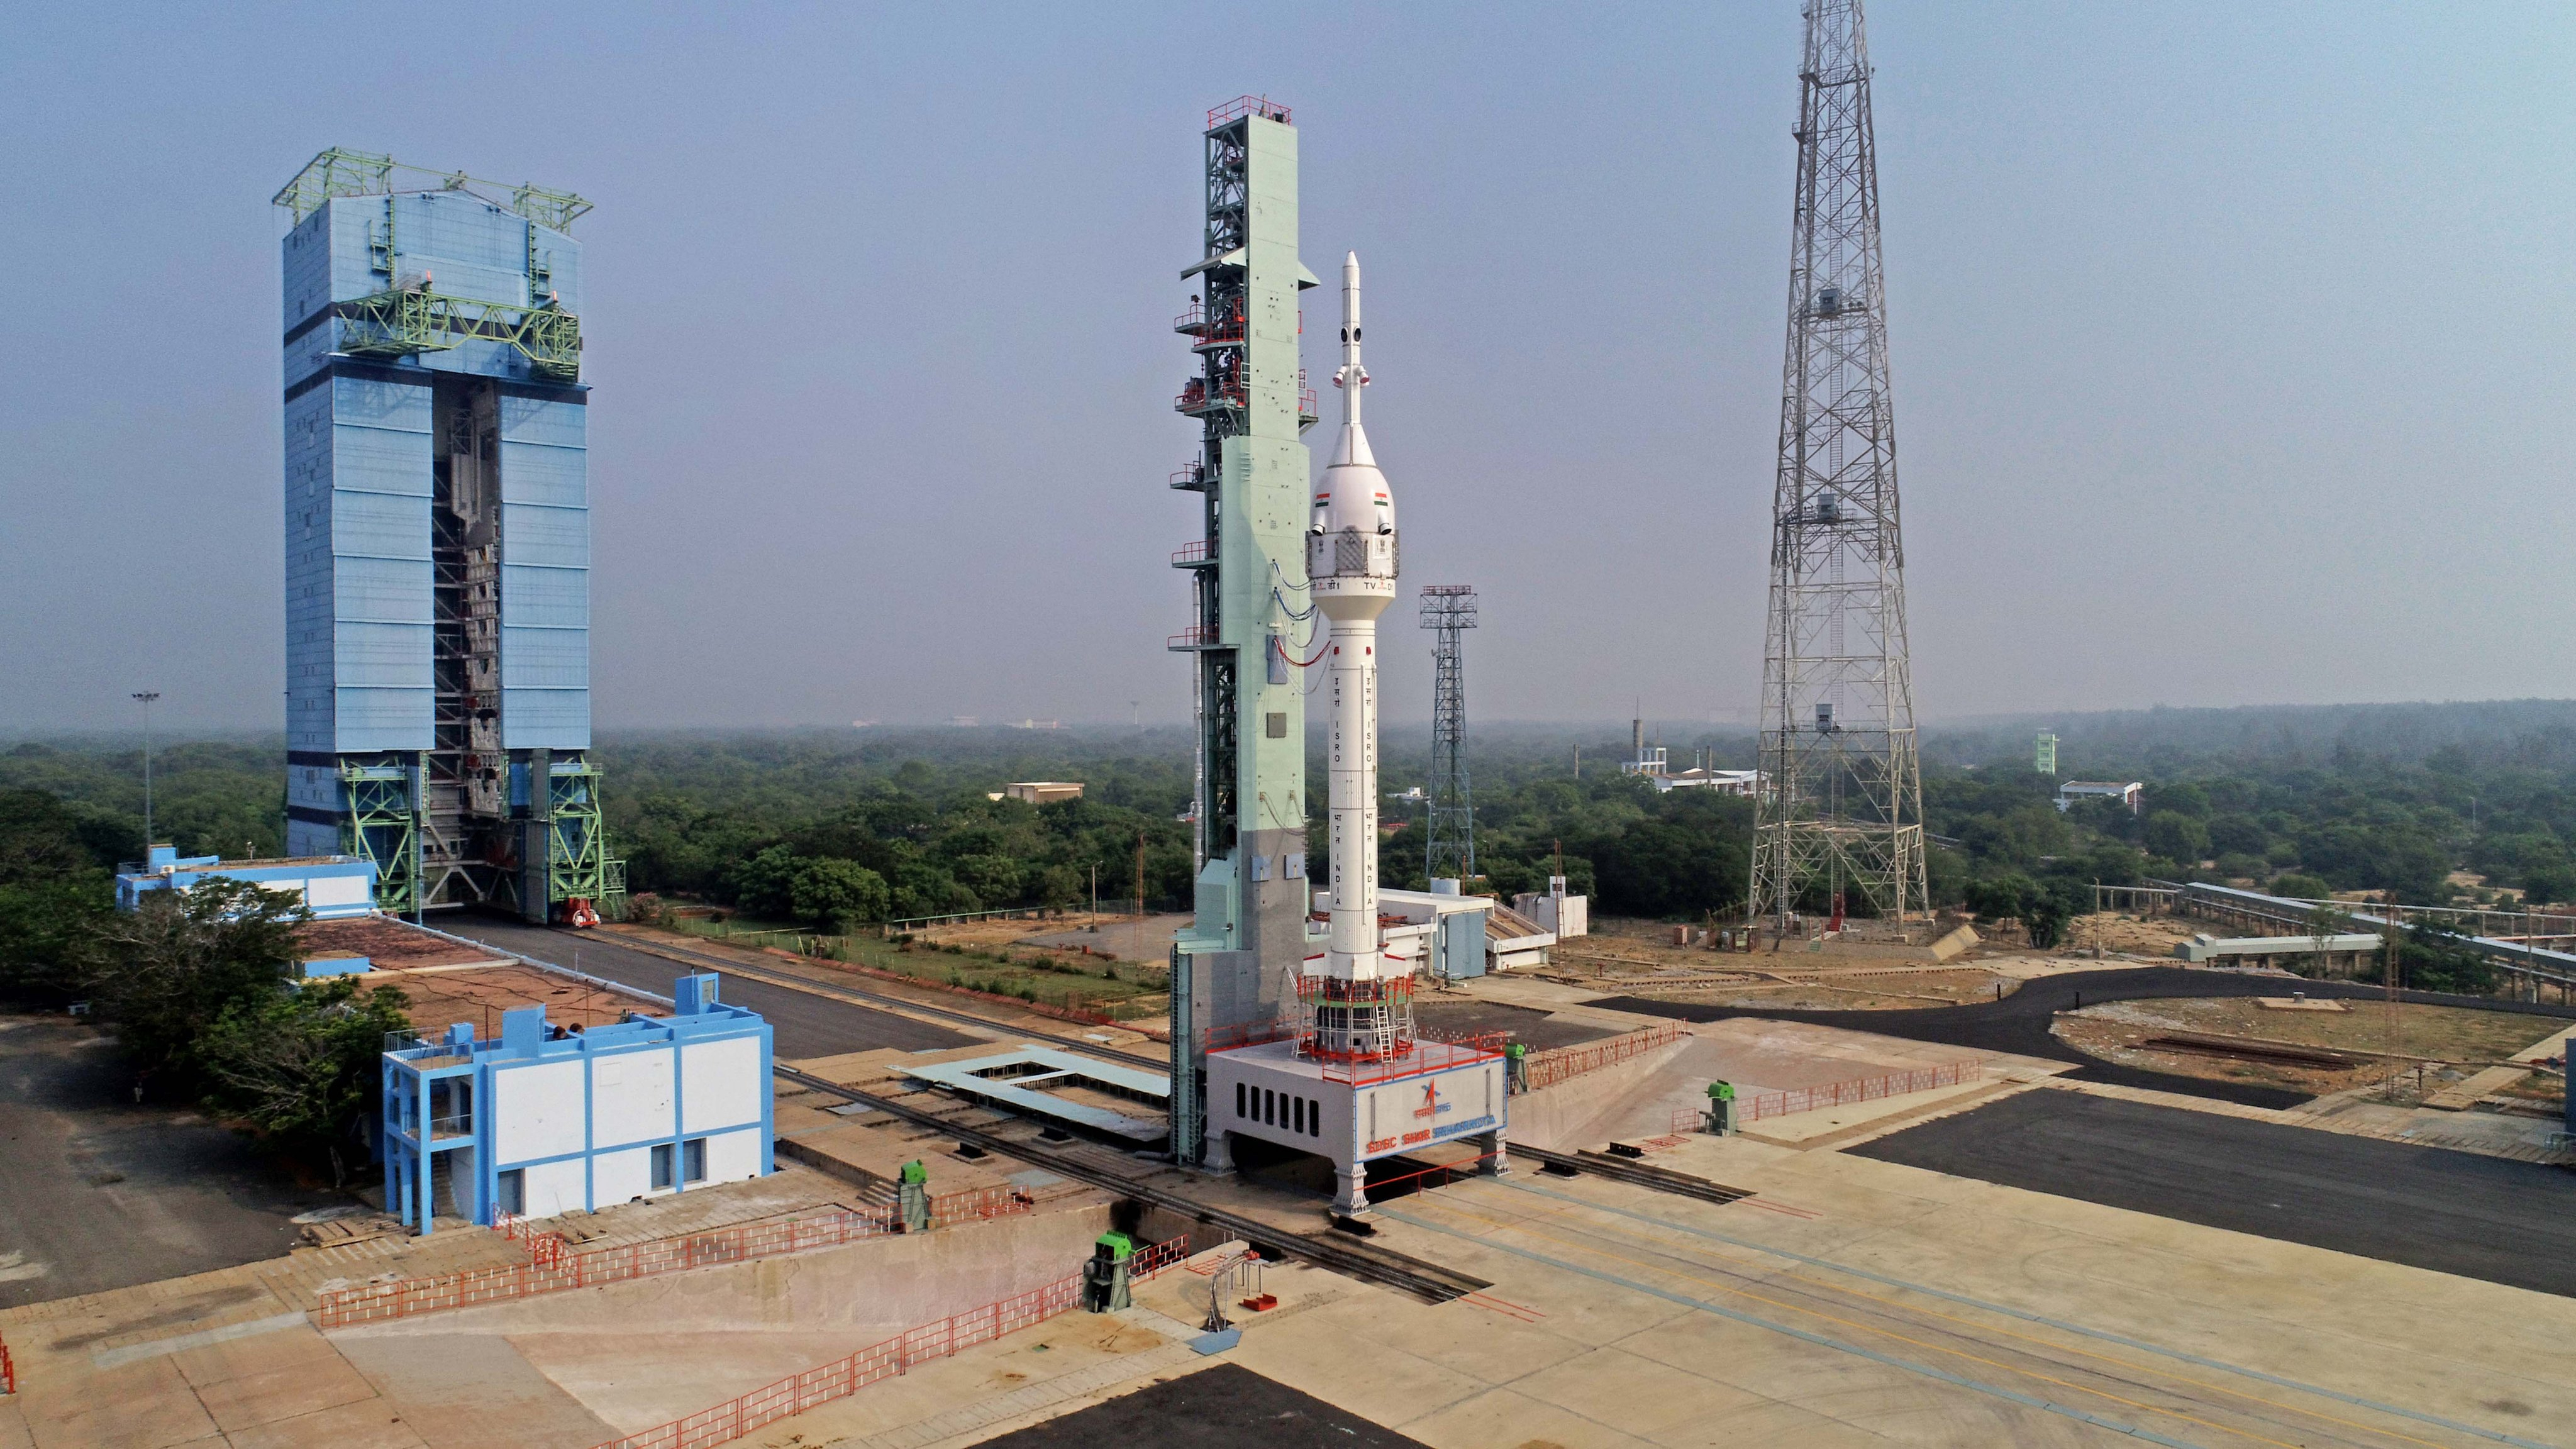 India launching test flight tonight for future Gaganyaan astronaut mission: Watch it live Space